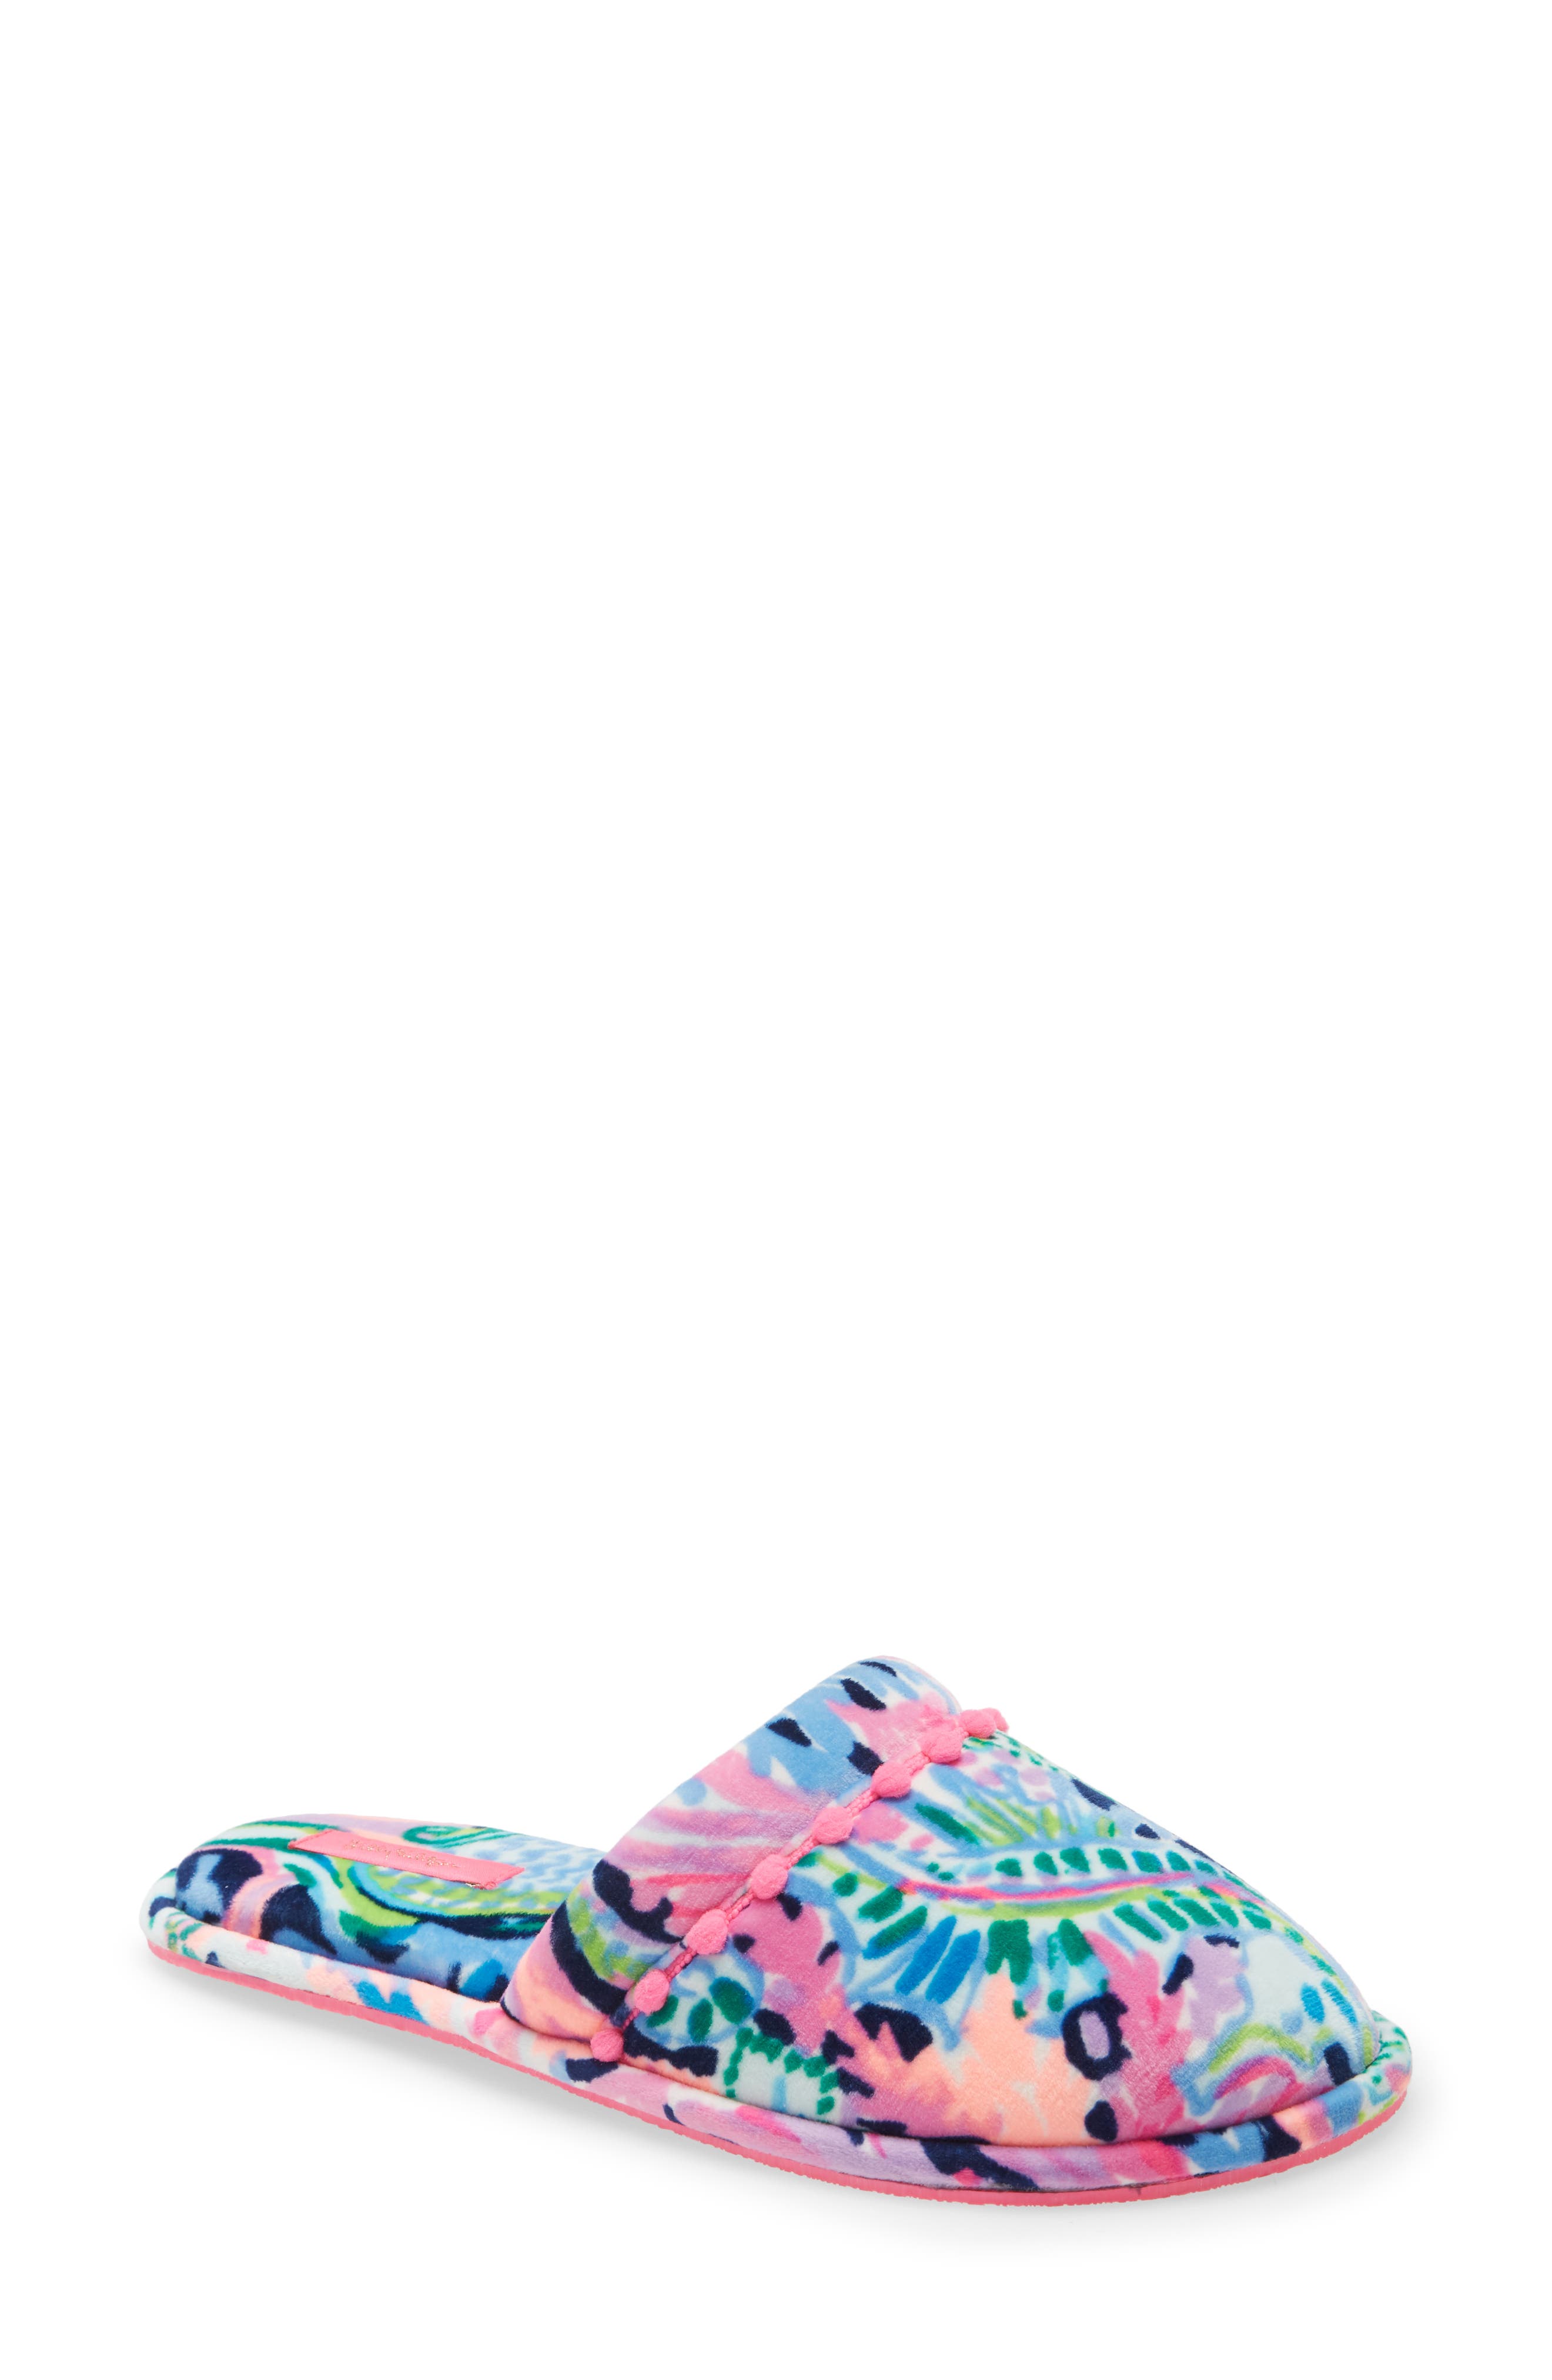 lilly pulitzer tennis shoes